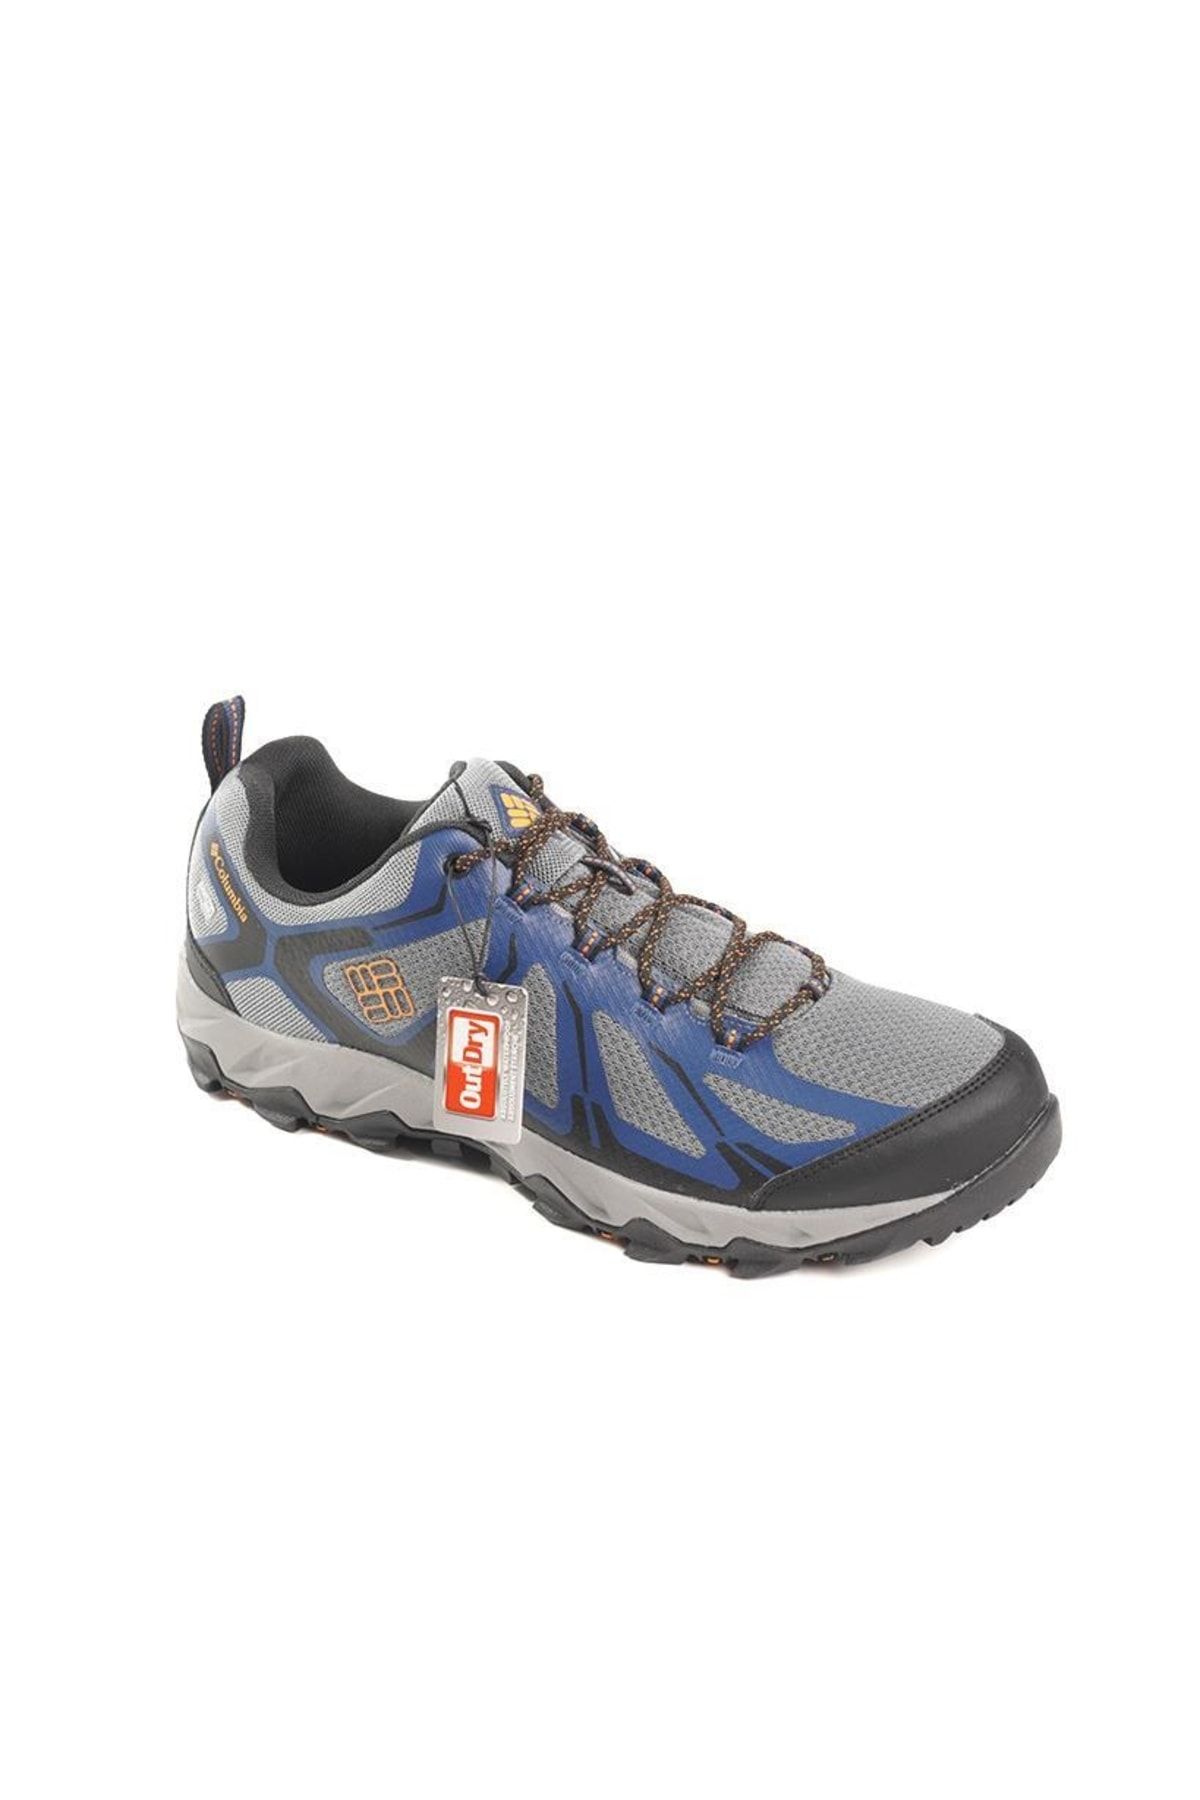 New Columbia Men's M Grove Heights Low Outdry Waterproof Hiking Shoes Size  7